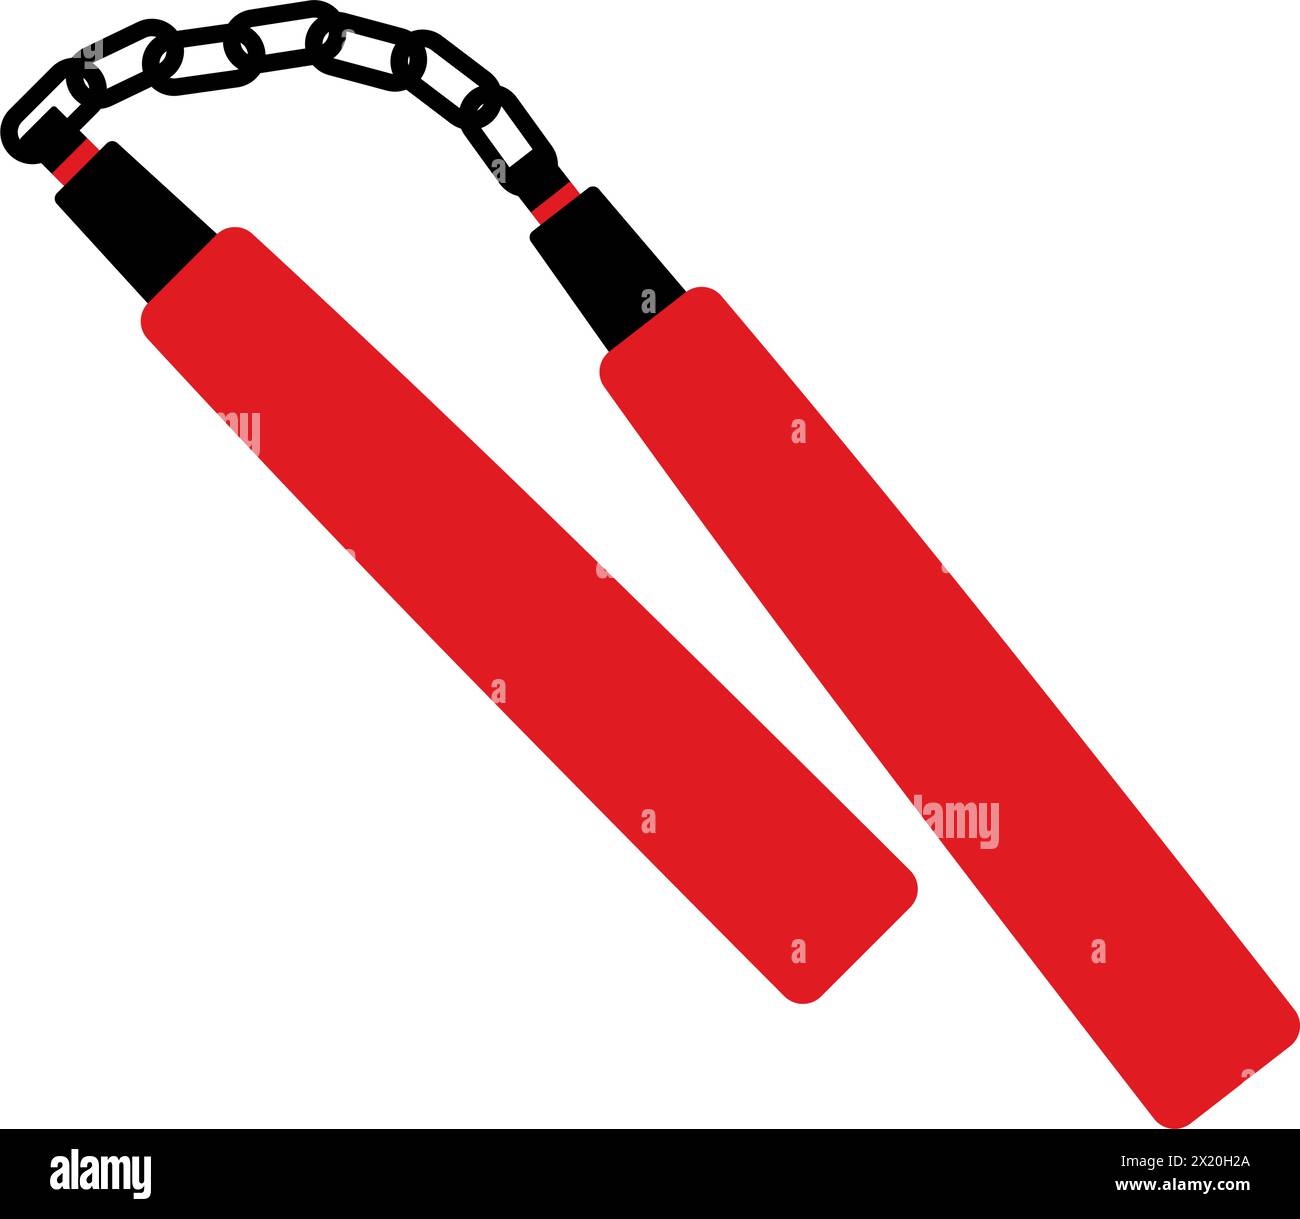 Martial arts weapons and equipment: nunchuck icon Stock Vector